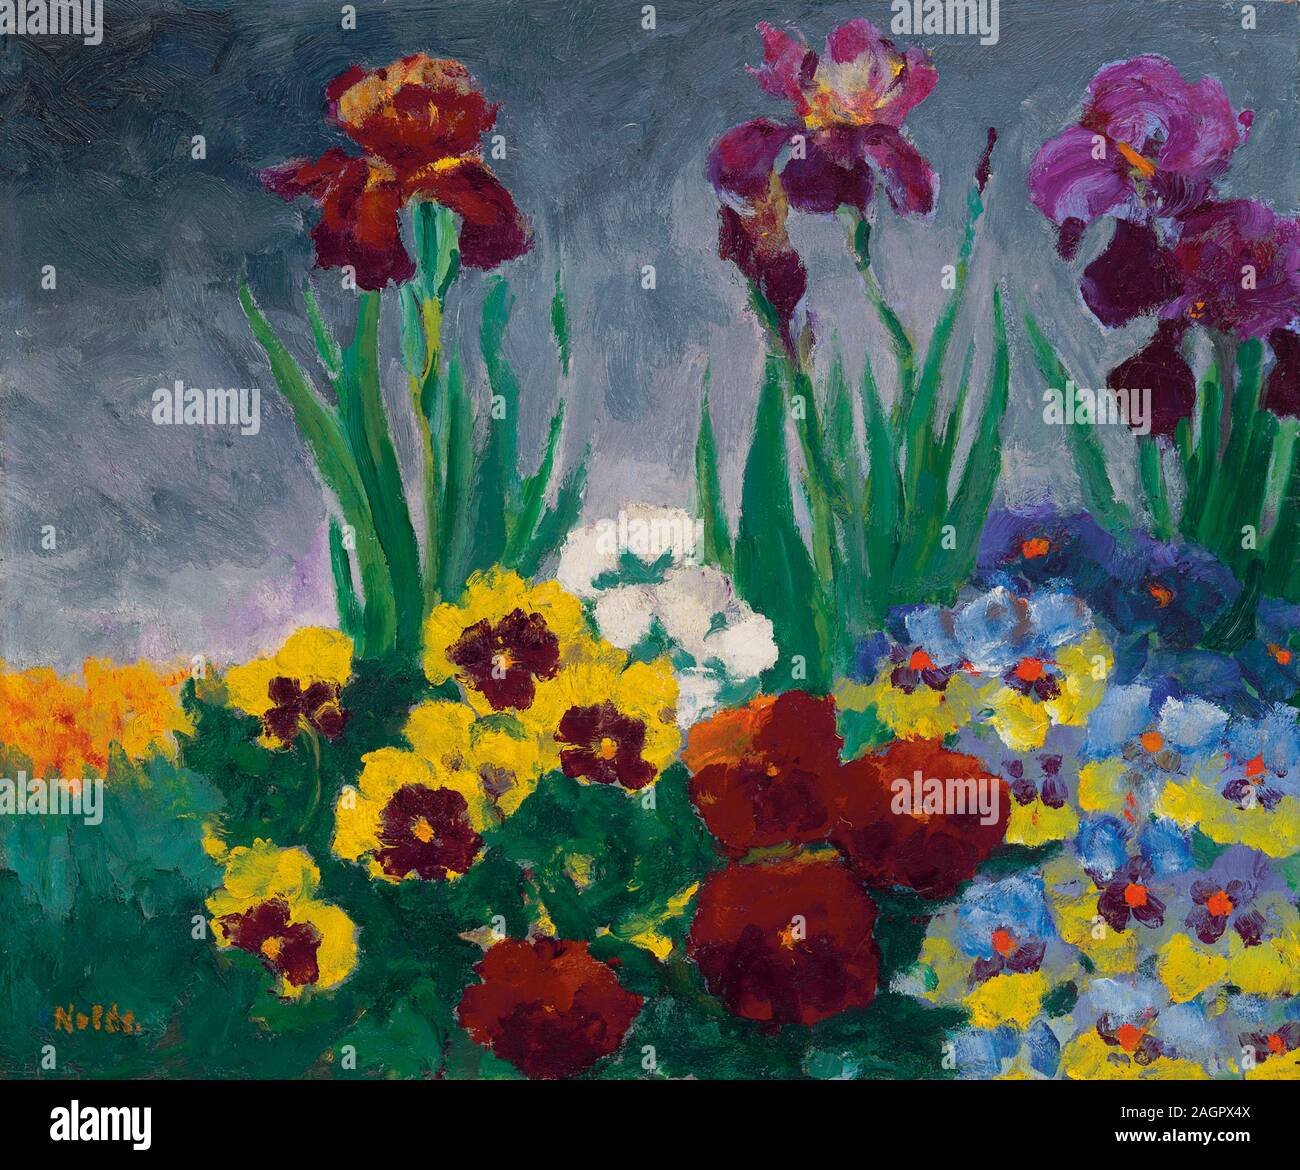 Irises and pansies. Museum: PRIVATE COLLECTION. Author: EMIL NOLDE. Stock Photo